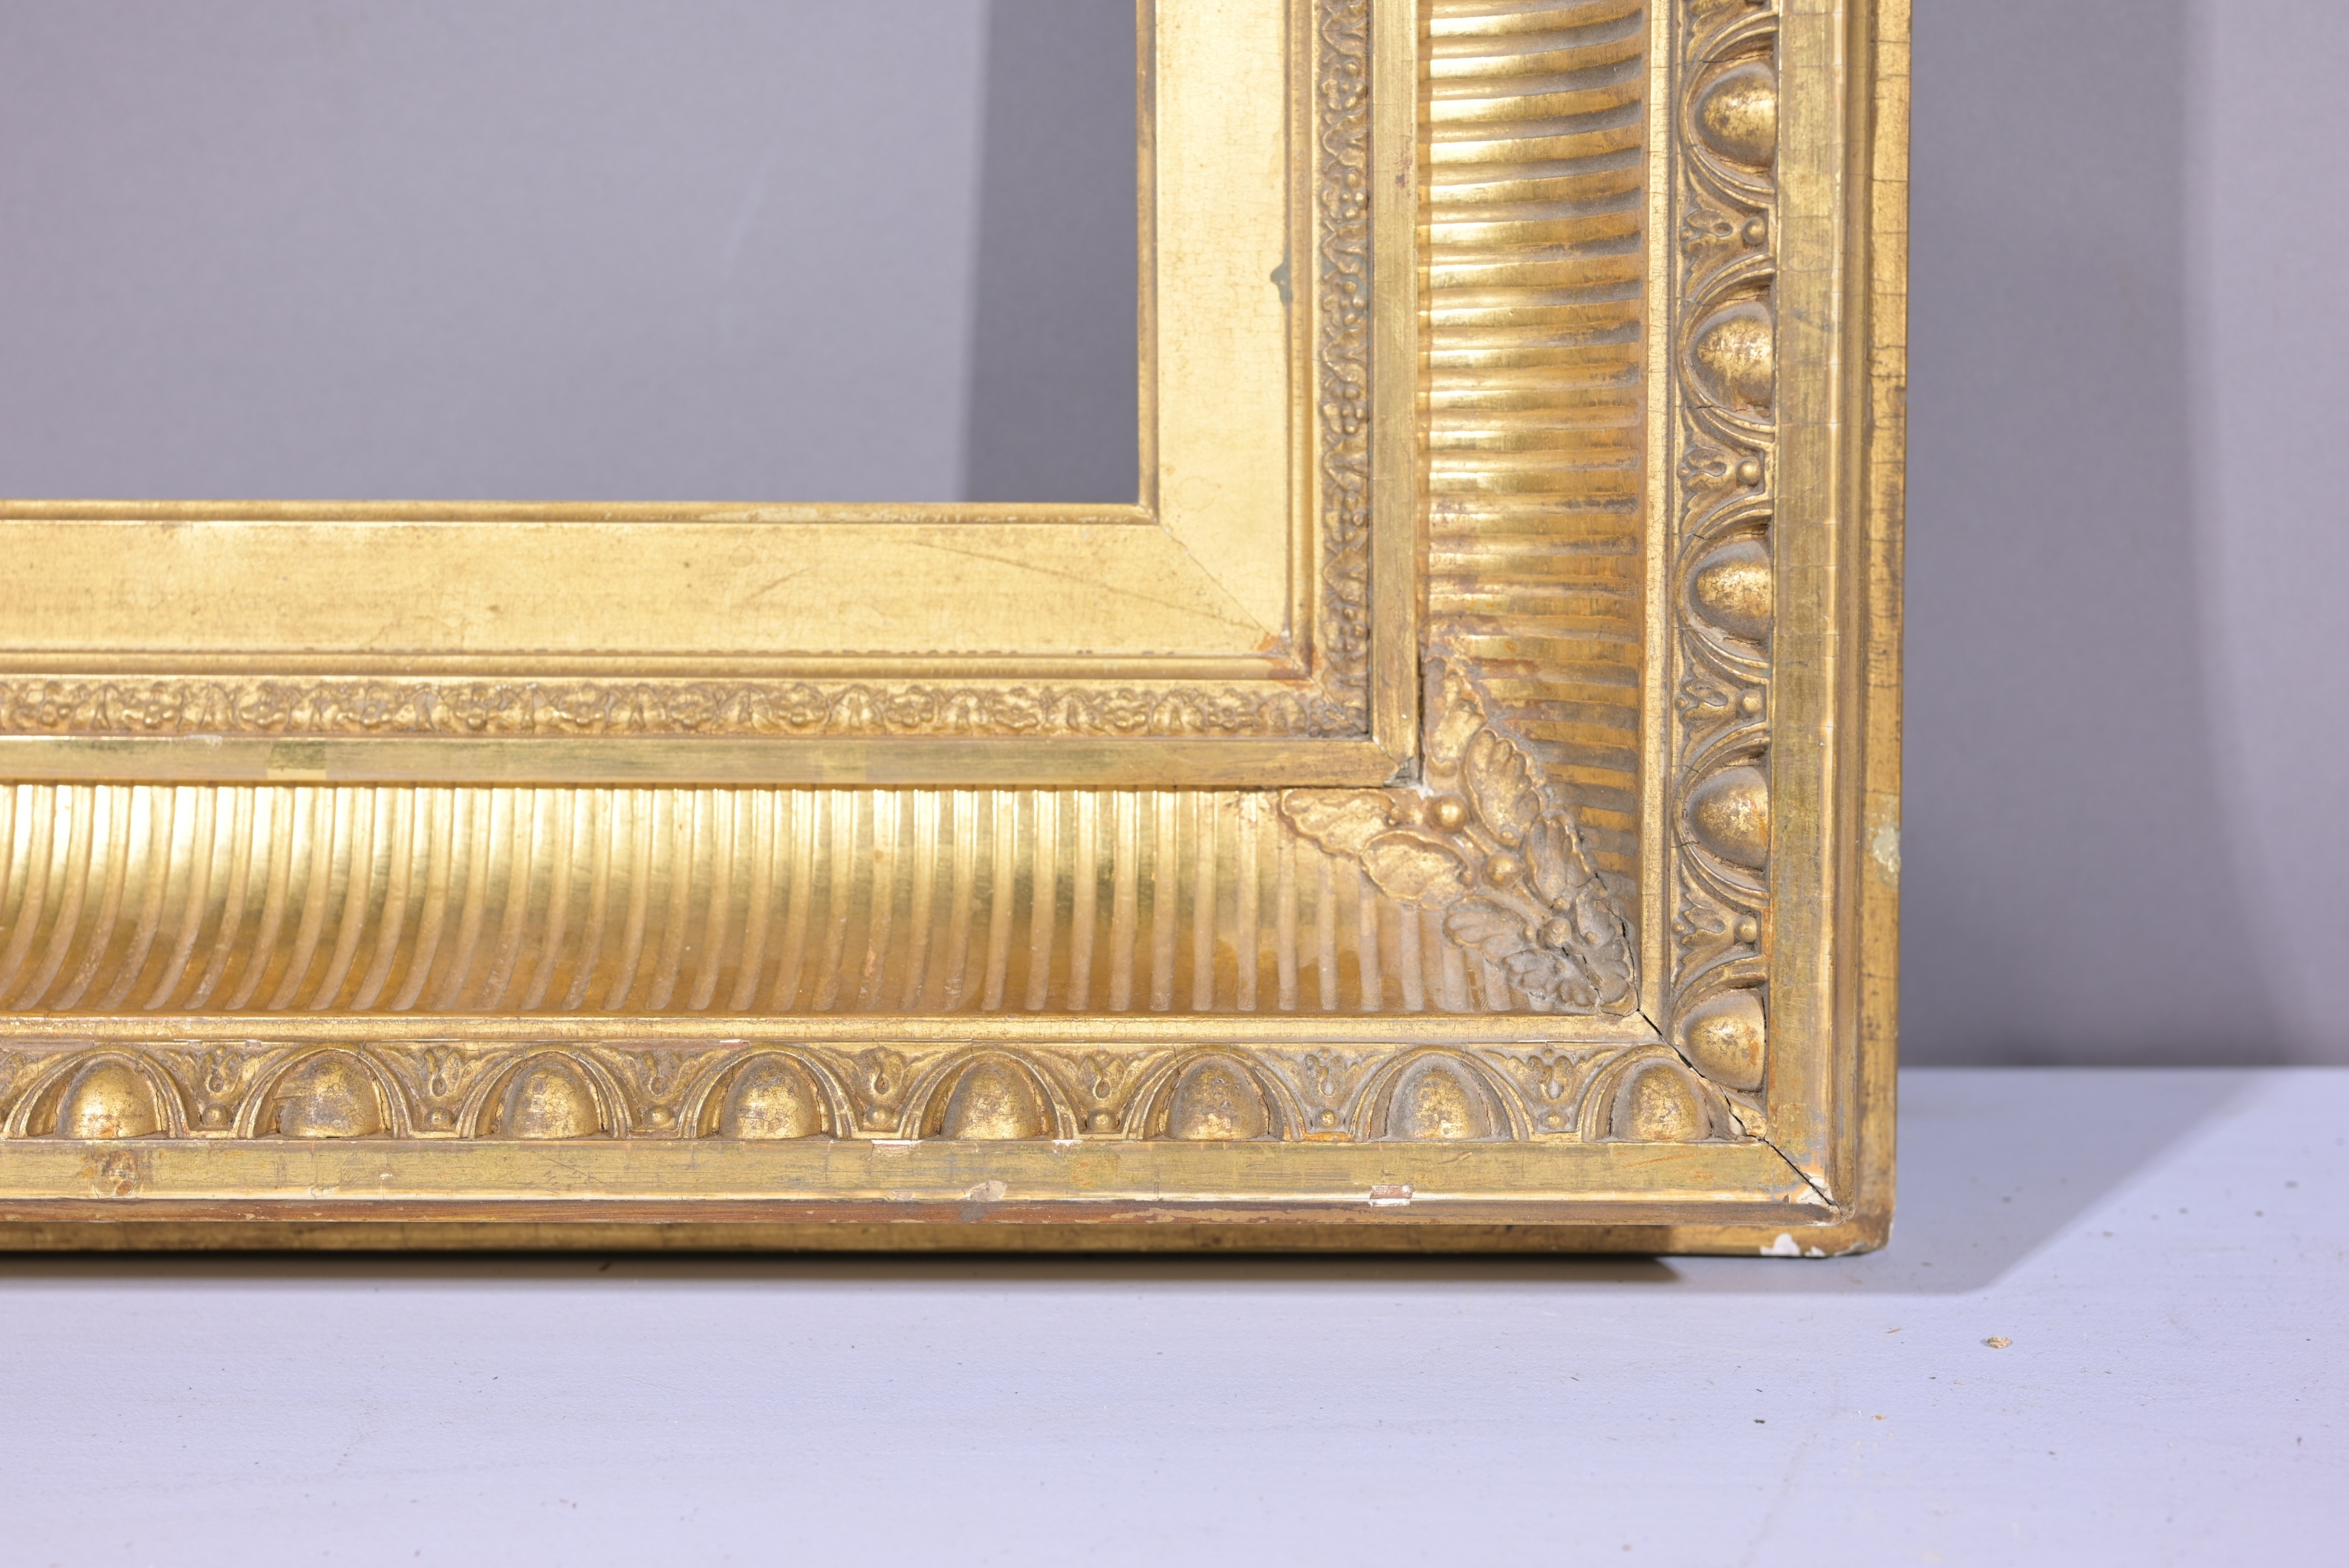 American c.1870's Fluted Cove Frame - 17.5 x 10 - Image 4 of 8